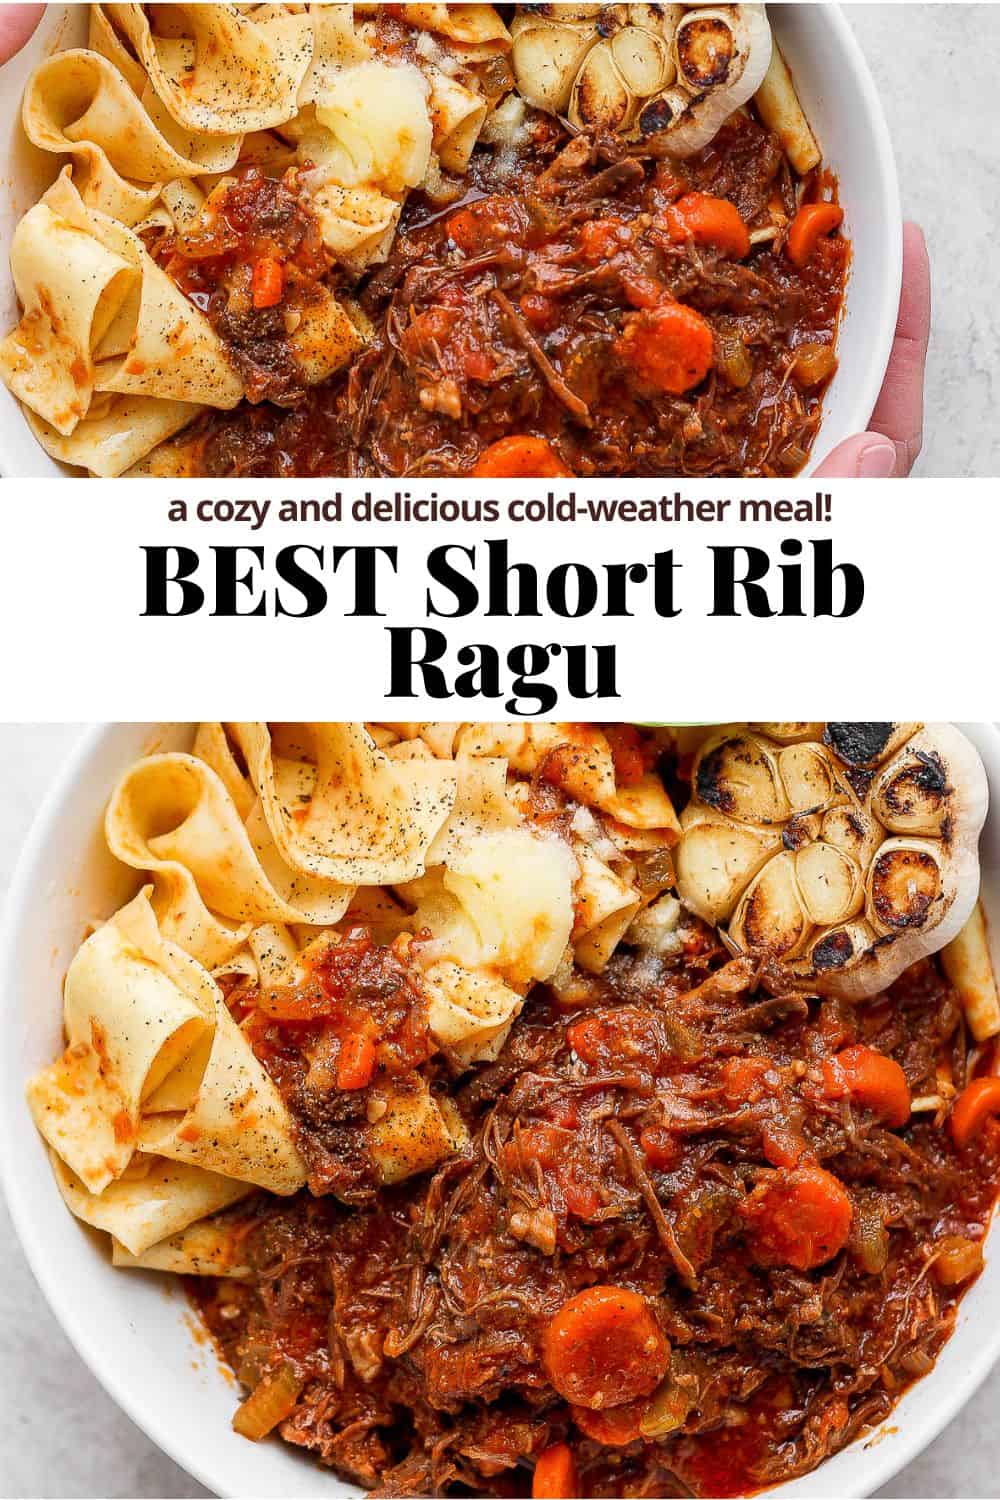 Pinterest image with a picture of a bowl of short rib ragu with text overlay that says "short rib ragu."